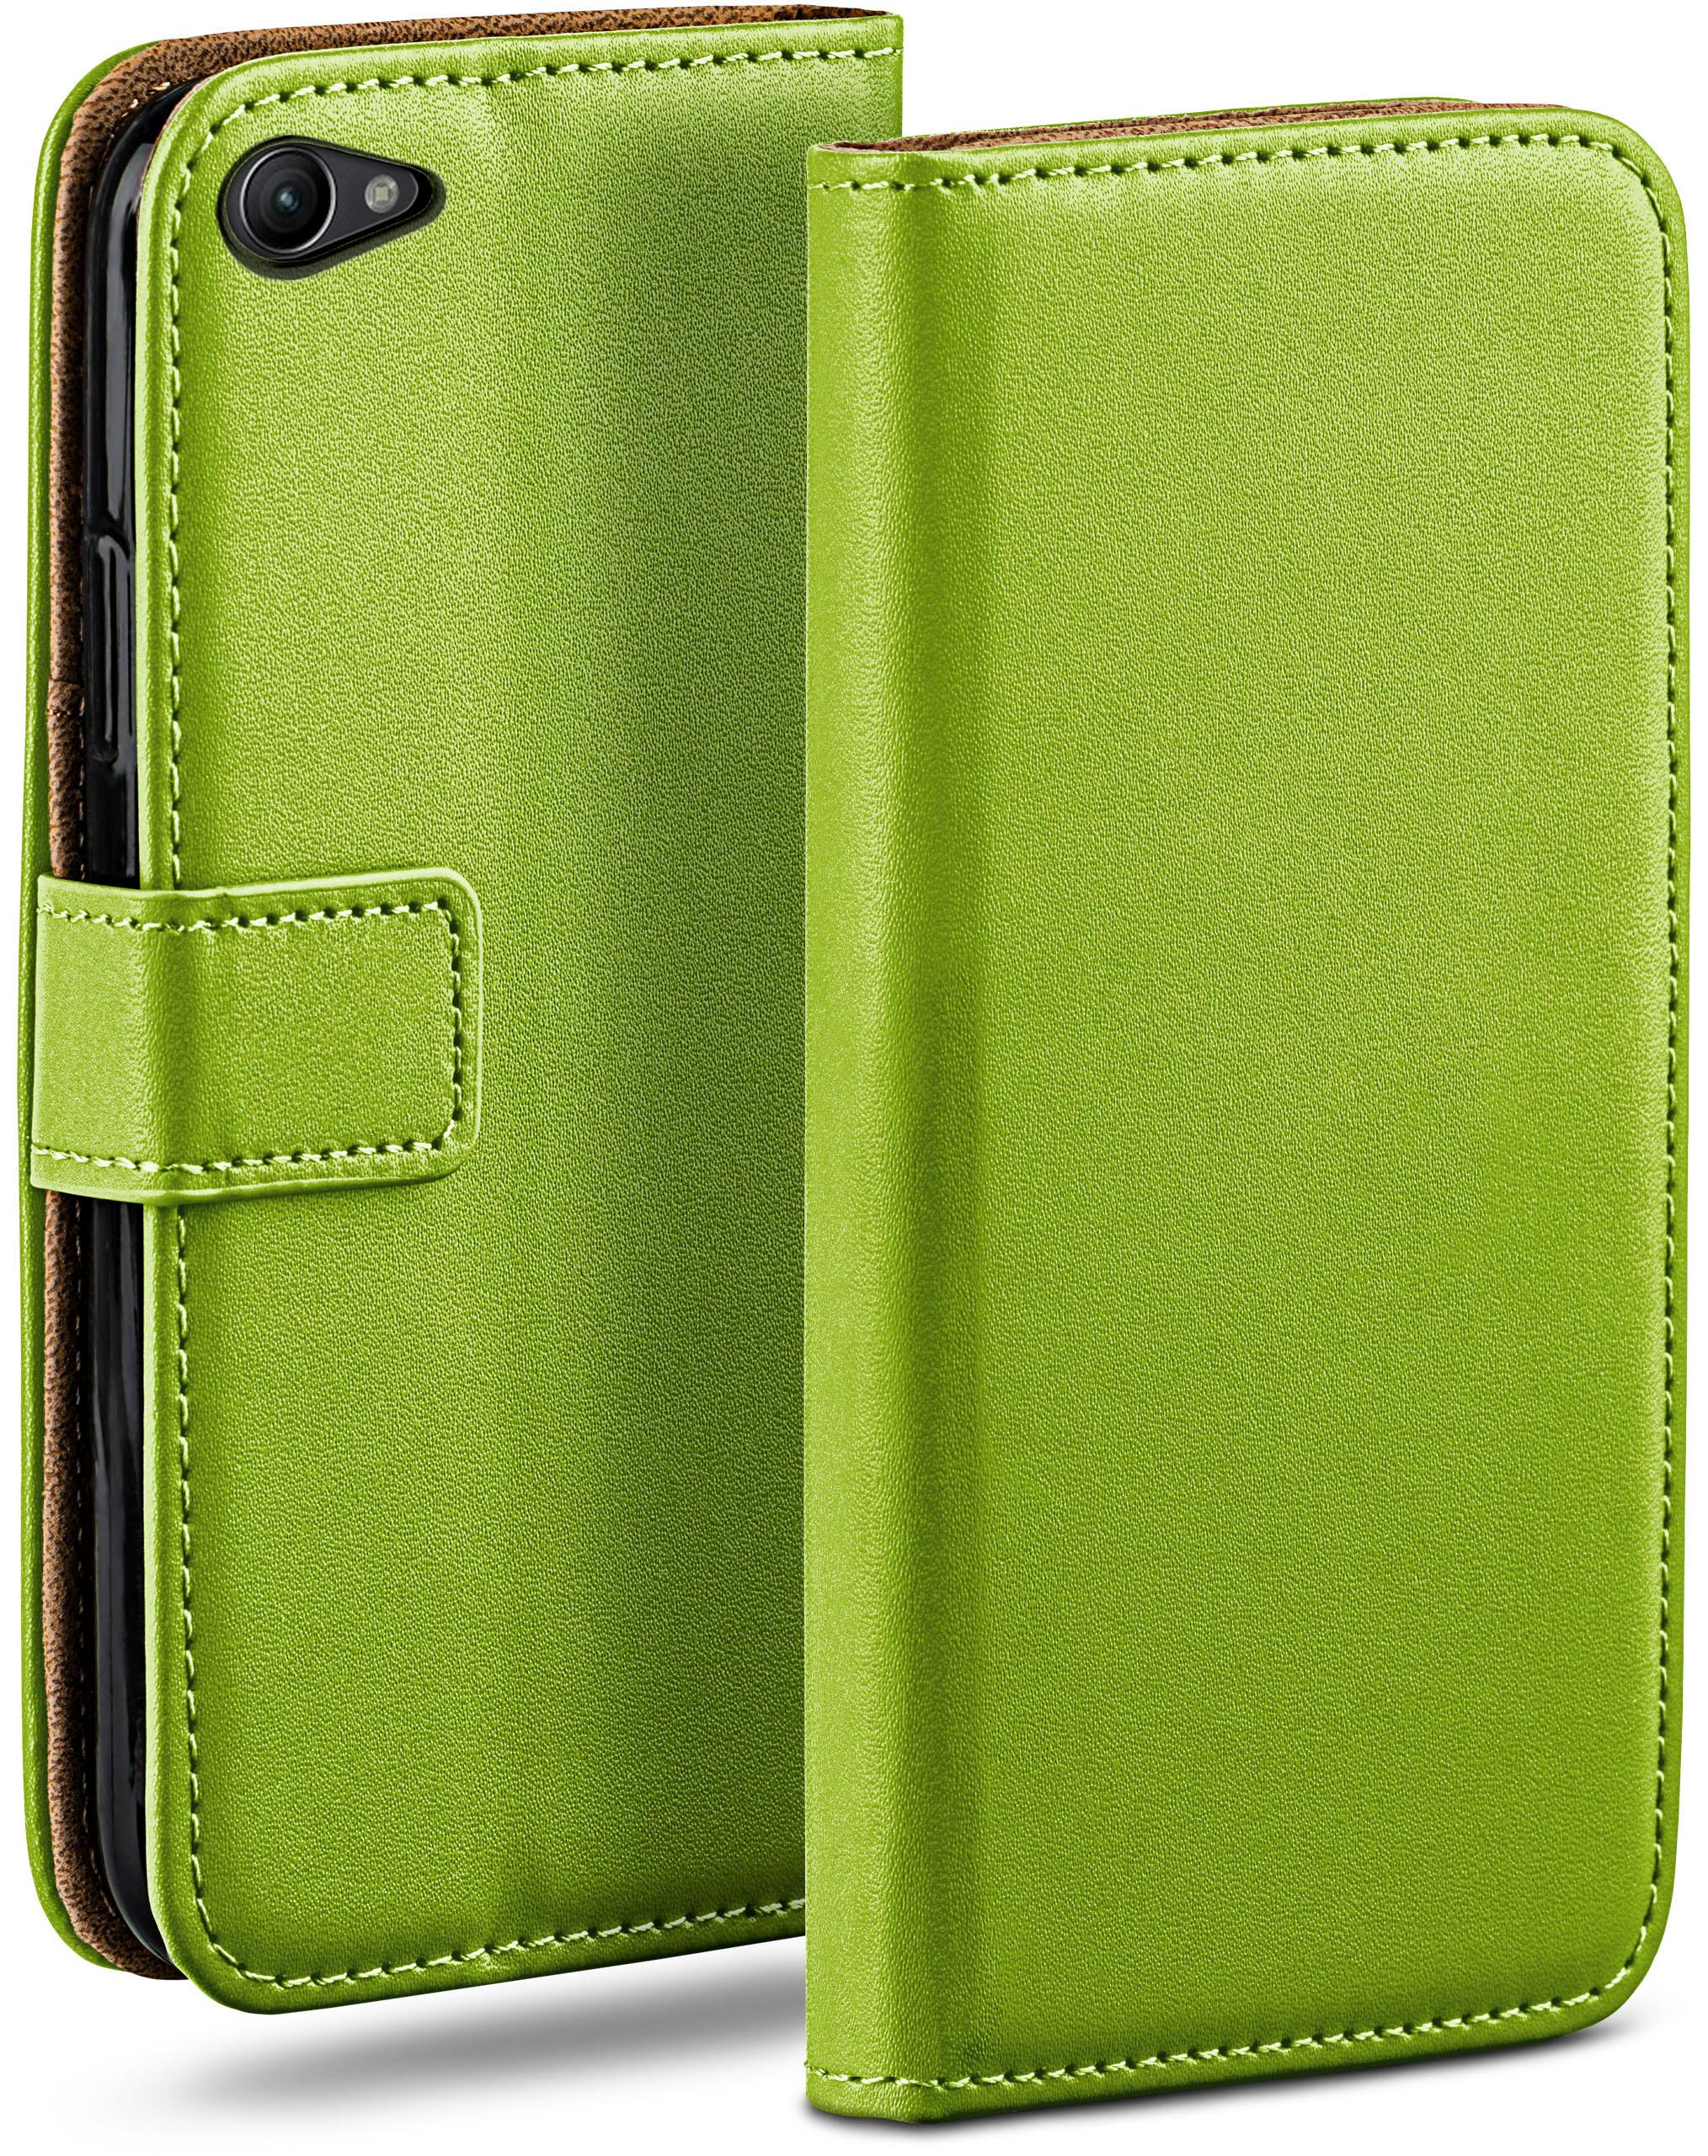 Book Compact, MOEX Sony, Bookcover, Lime-Green Z1 Xperia Case,